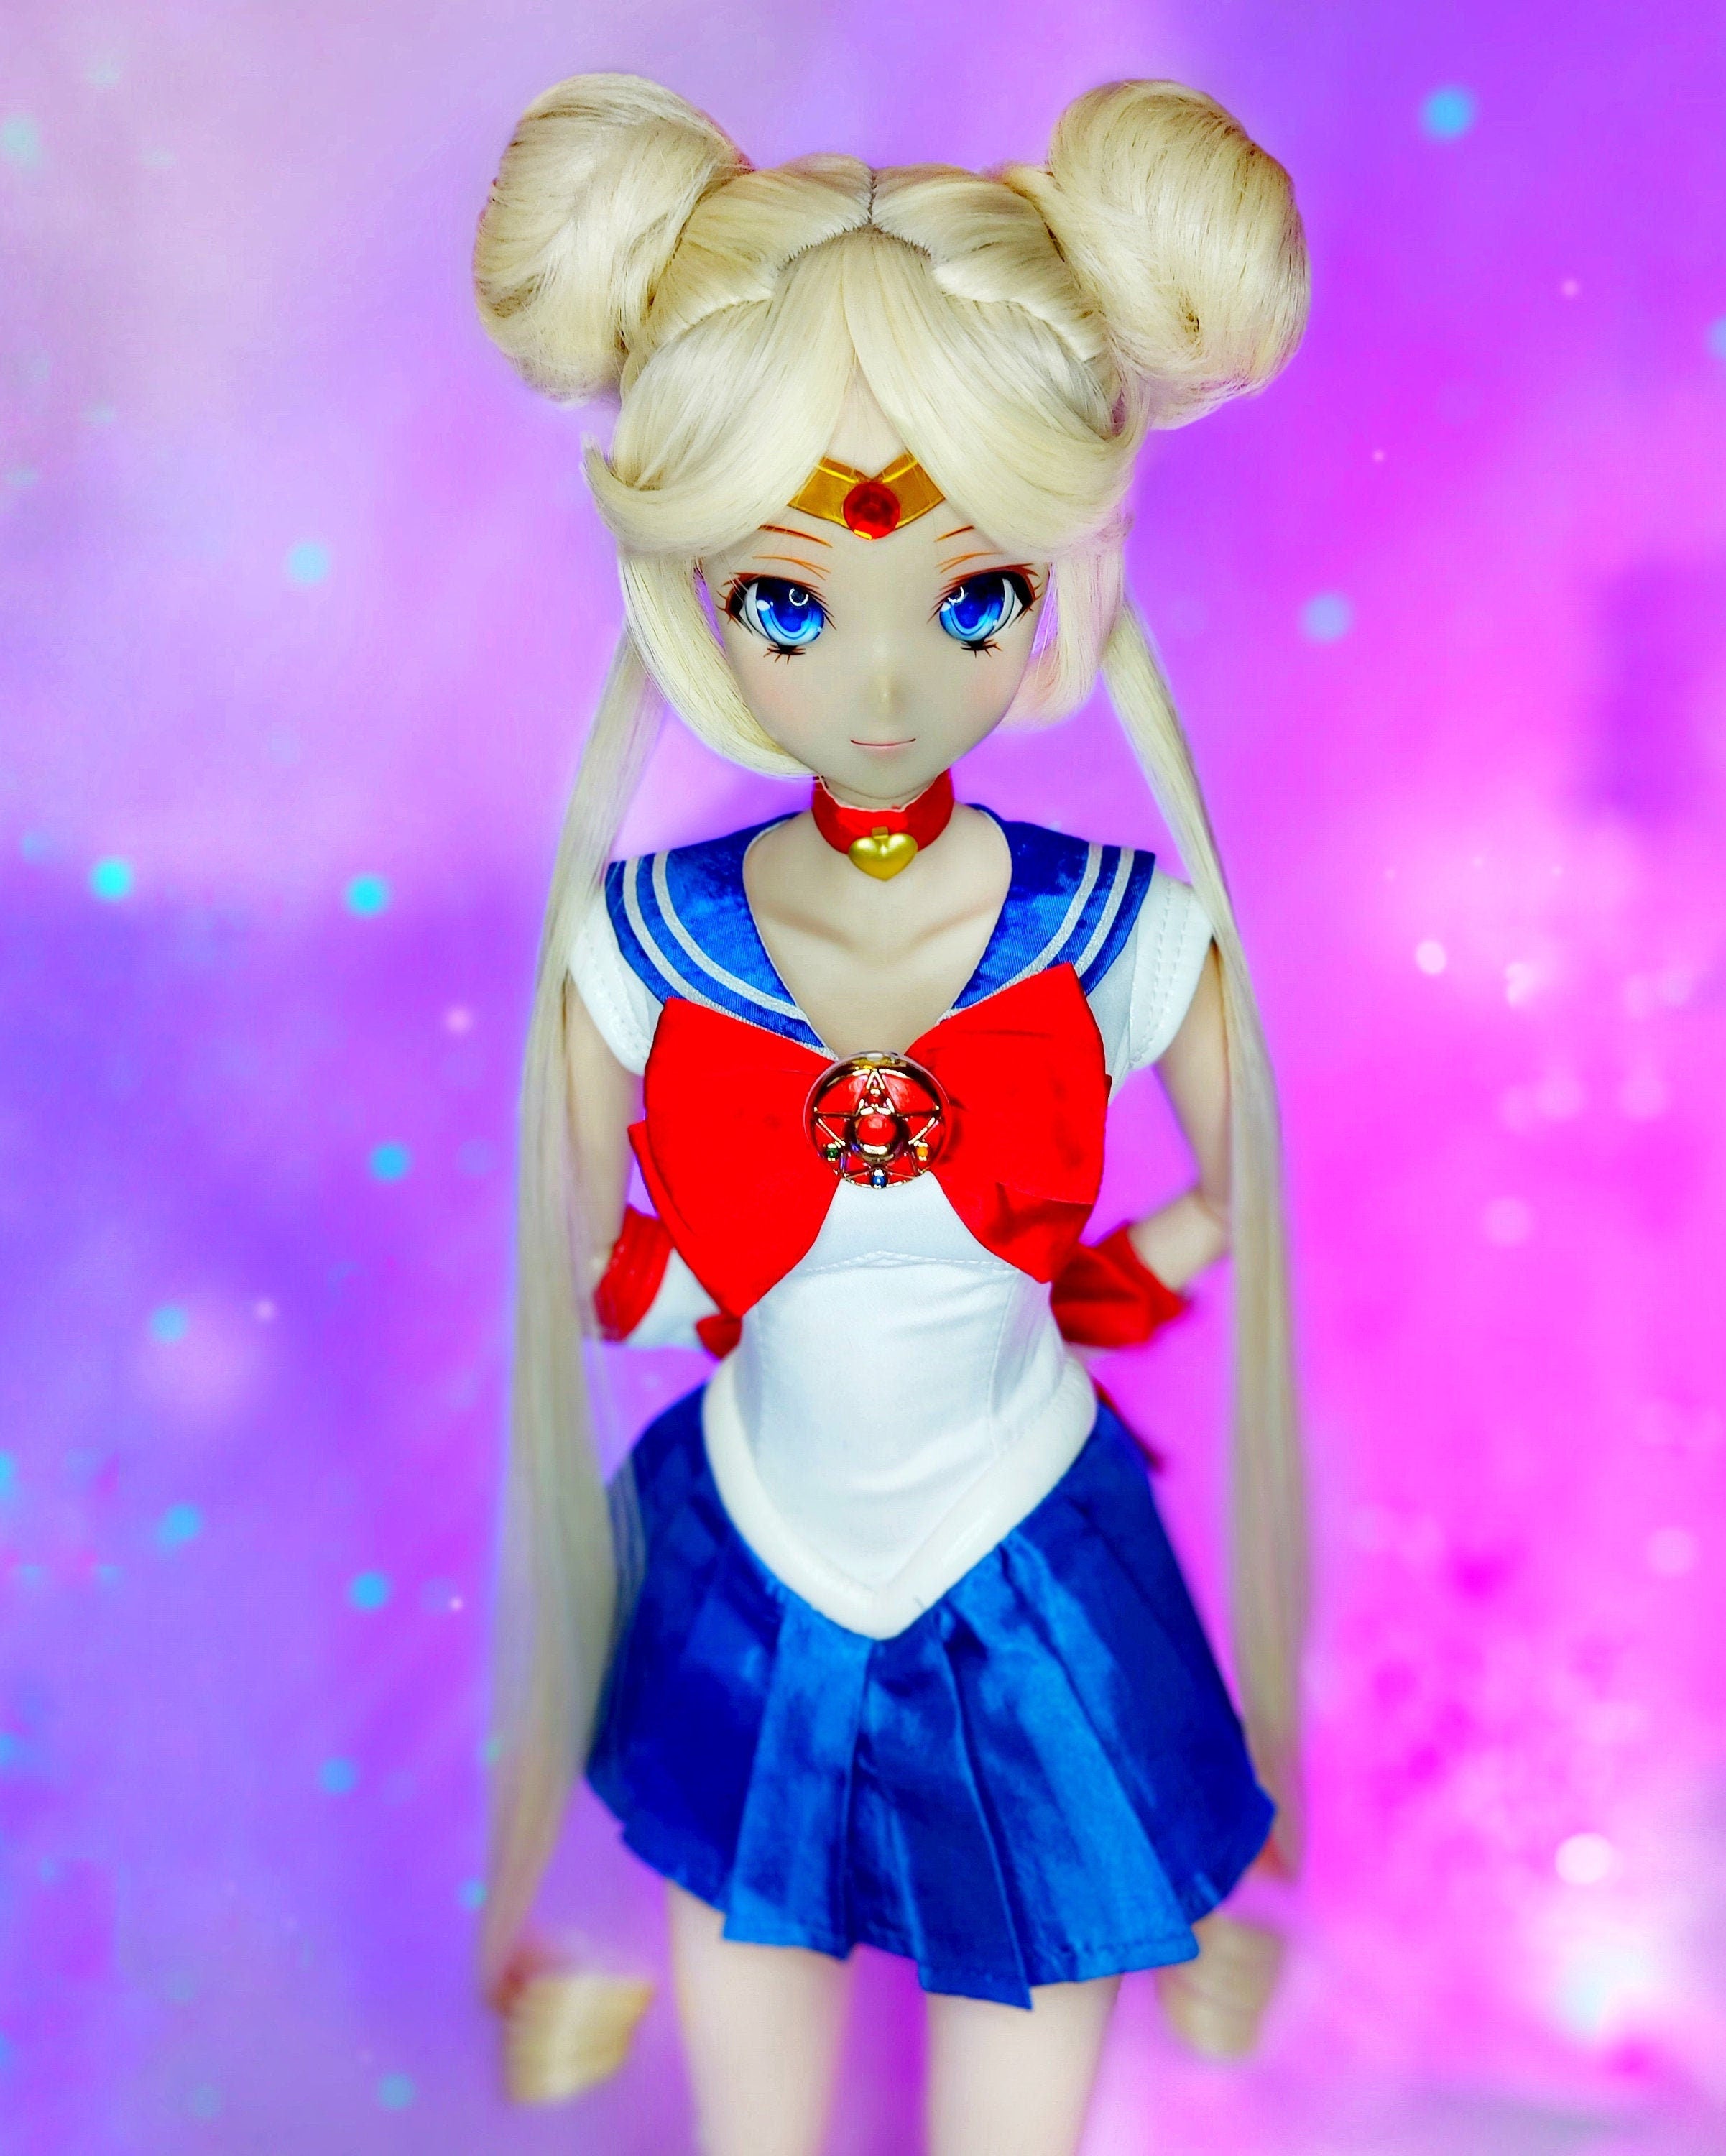 Custom doll Wig for Smart Dolls- Heat Safe - Tangle Resistant- 8.5" head size of Bjd, SD dolls Sailor Moon PREORDER